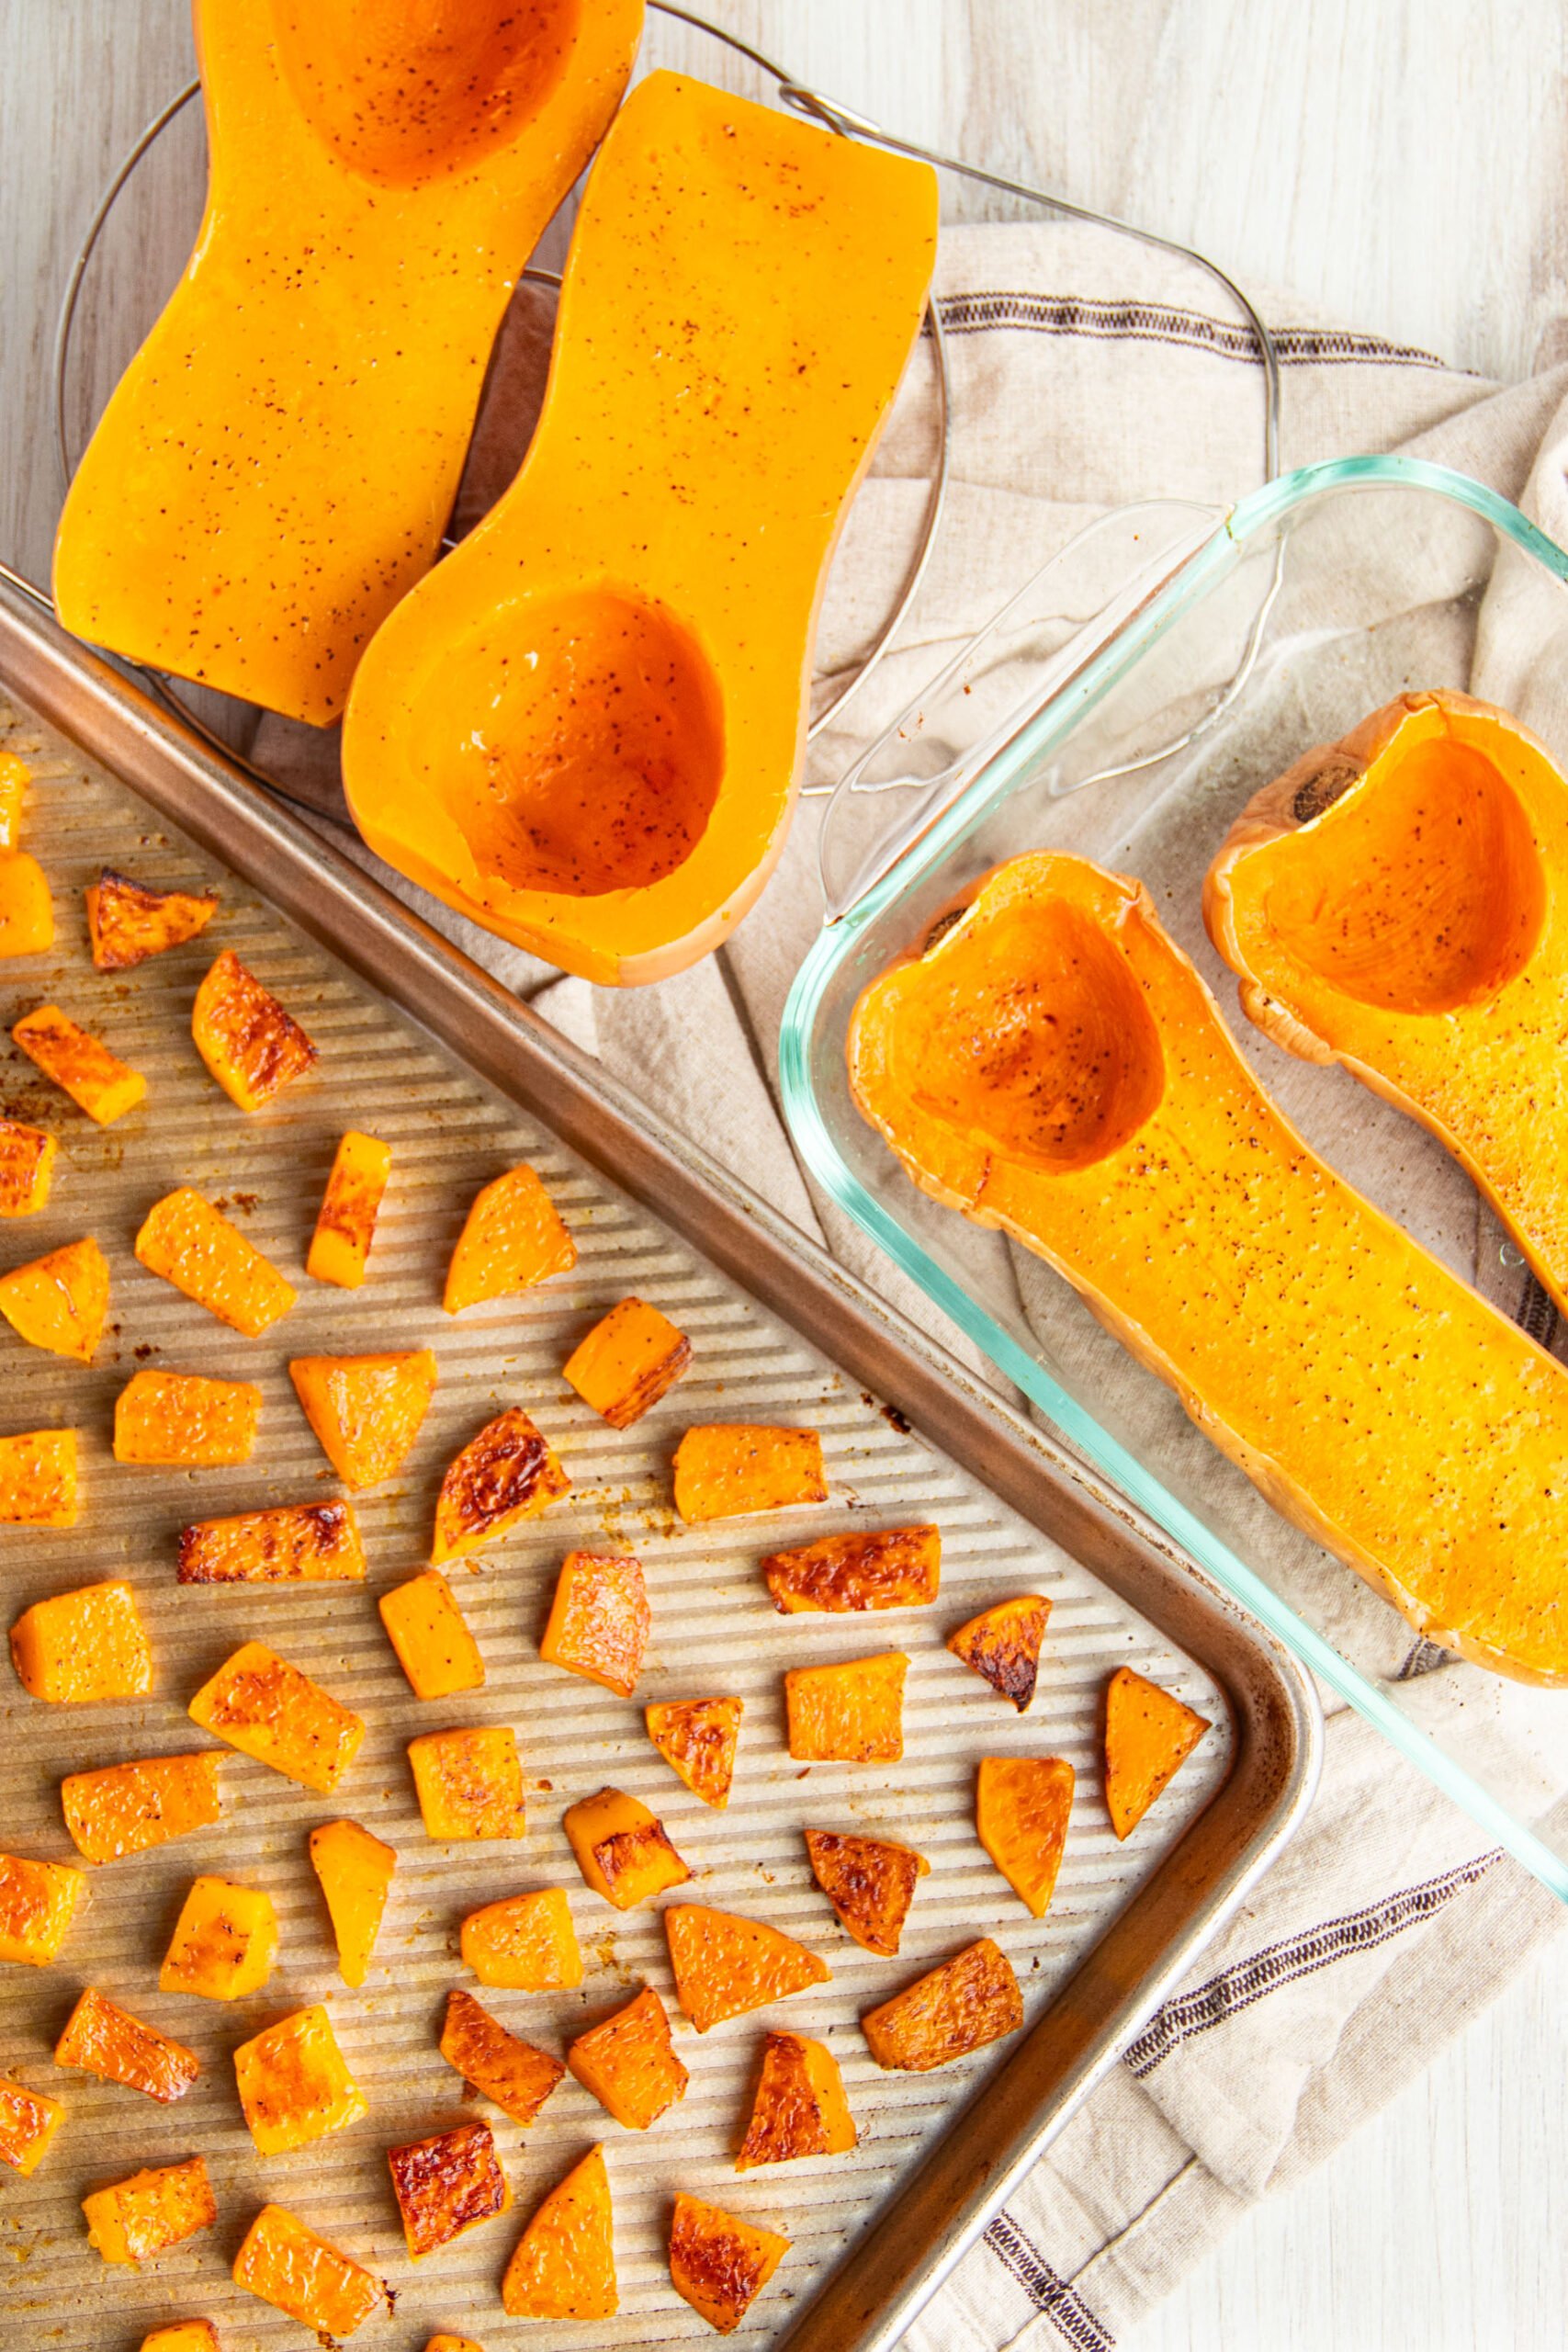 https://40aprons.com/wp-content/uploads/2019/12/How-to-cook-butternut-squash-14-scaled.jpg